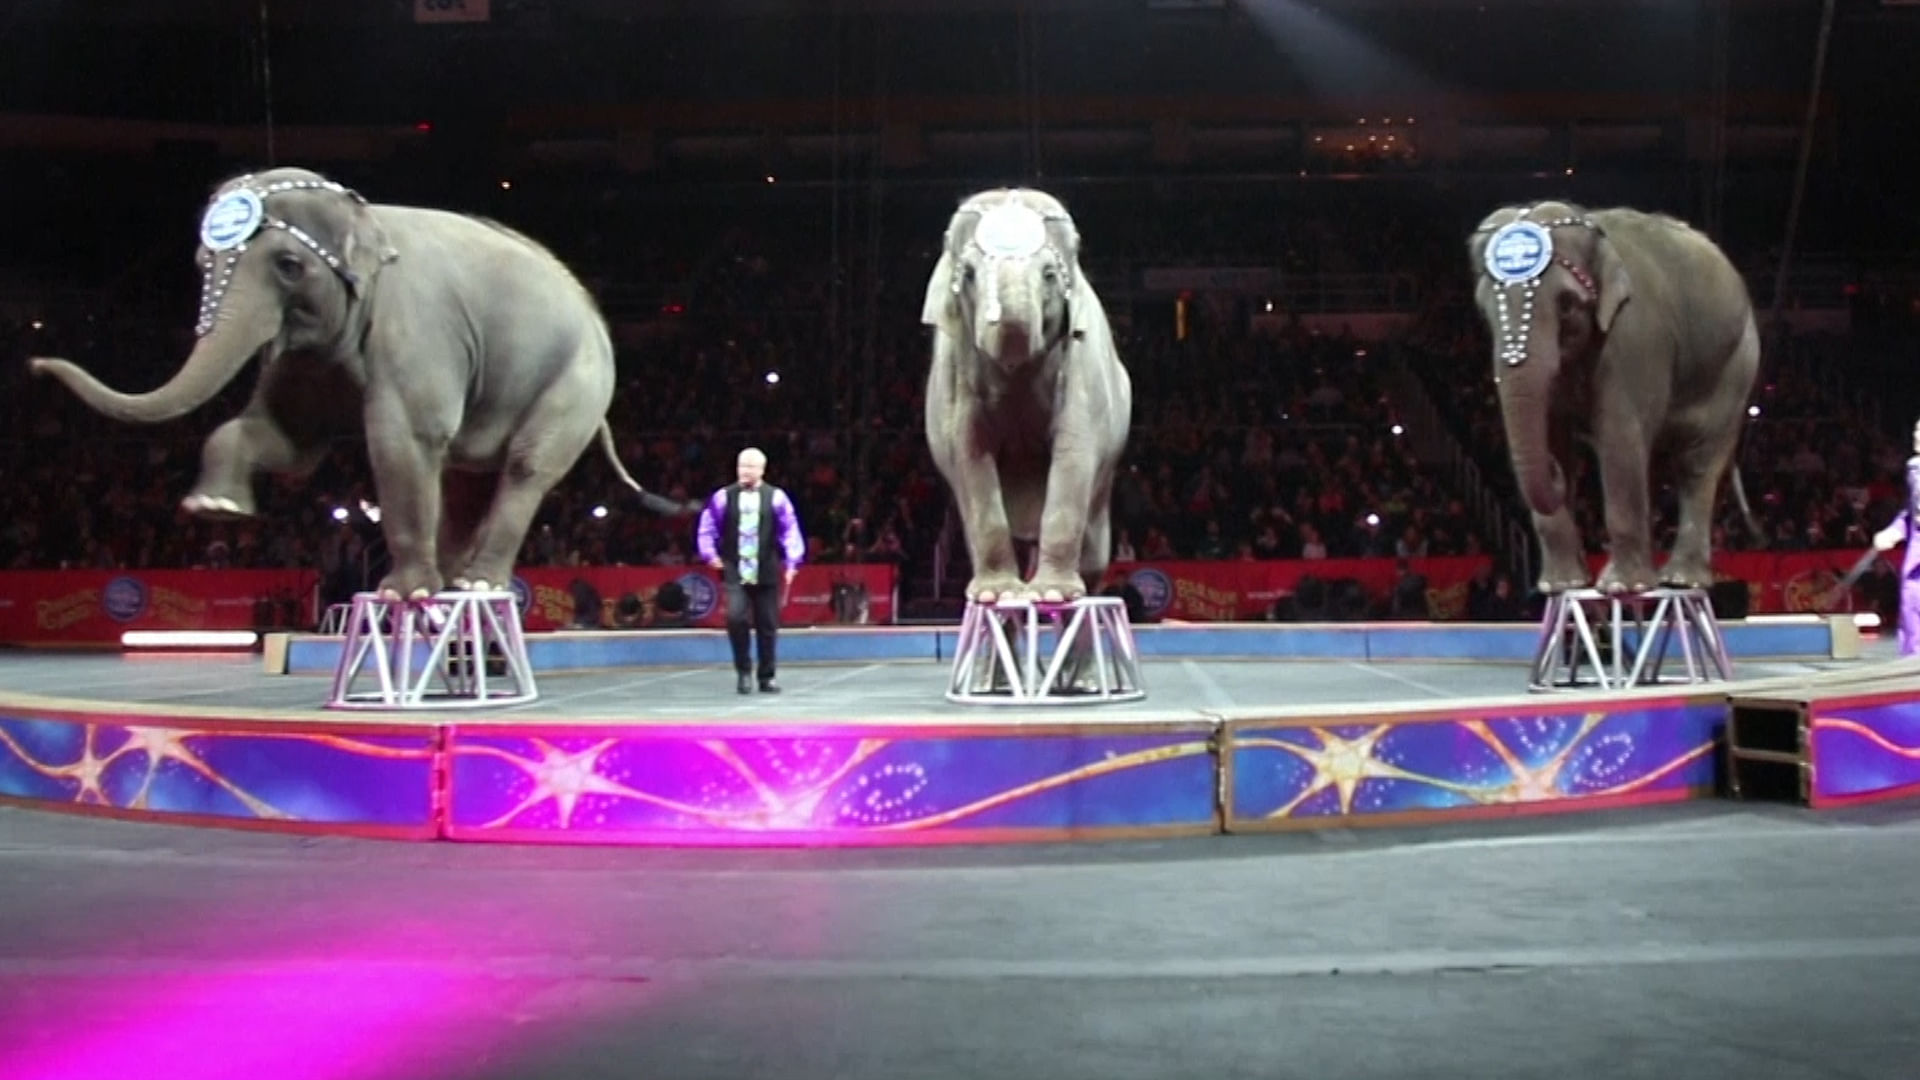 The crowd cheered as the elephants entered the arena to perform for the last time. (Photo: AP screengrab)